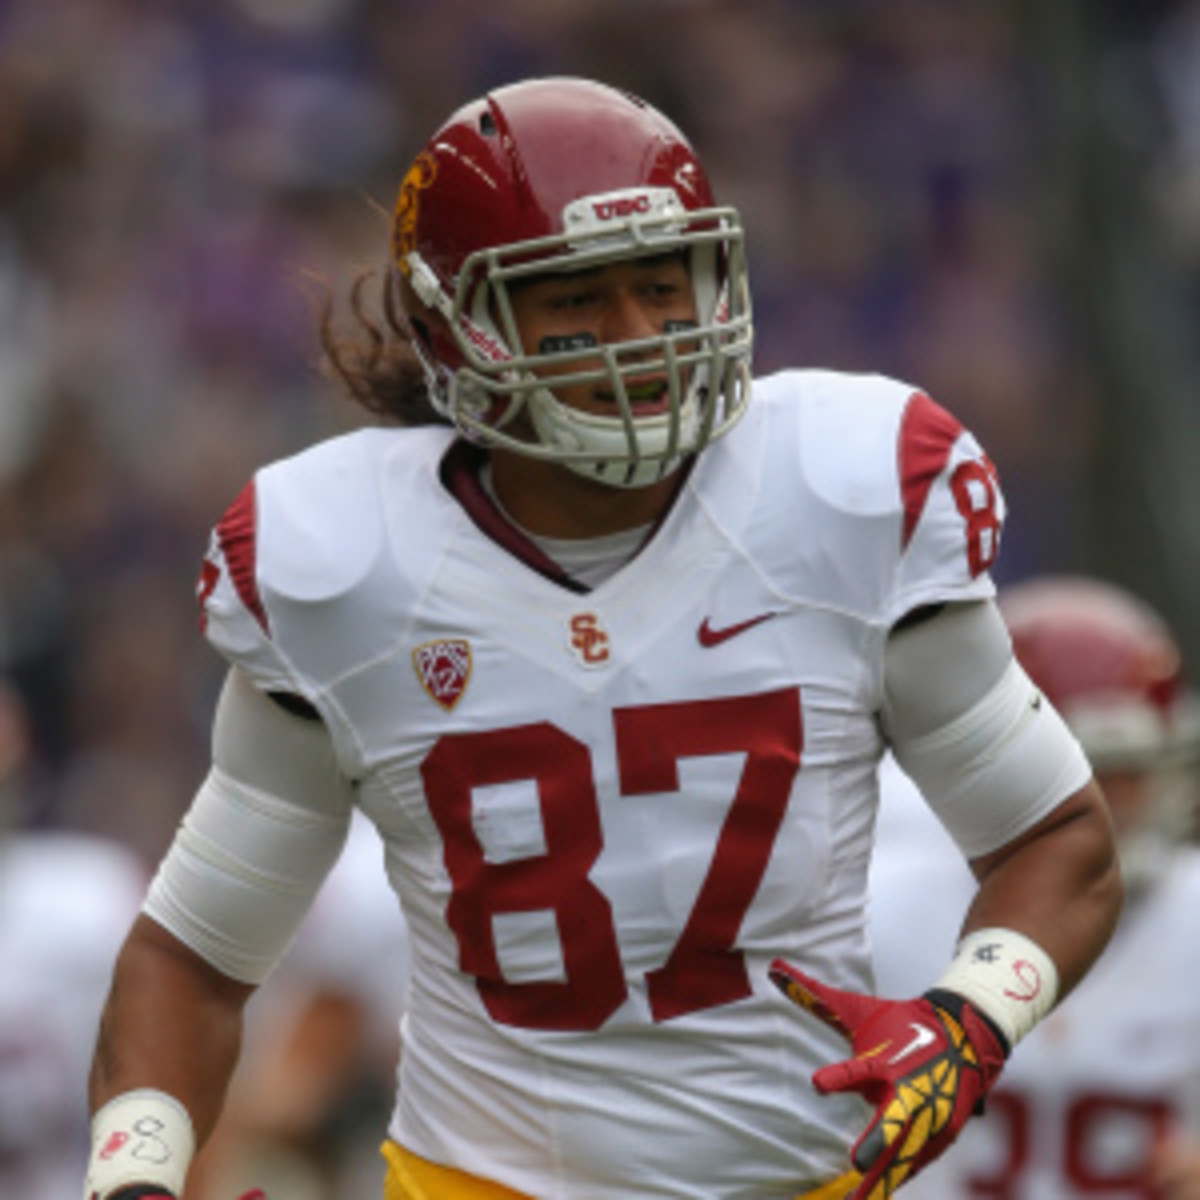 Junior Pomee has been removed from the USC Trojans. (Otto Greule Jr/Getty Images)